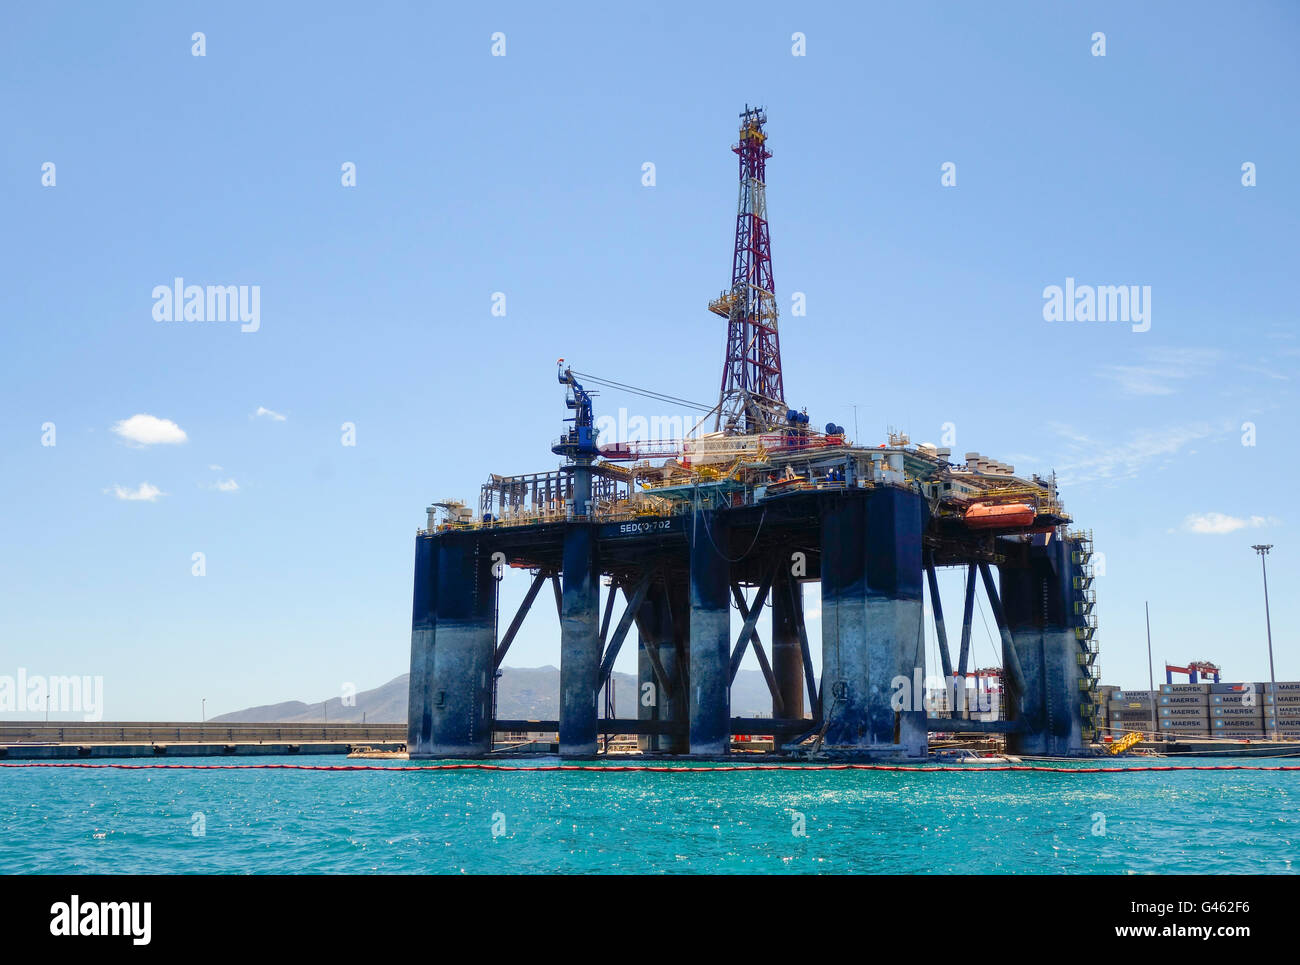 Oil rig Sedco 702, from Liberia moored in Port of Malaga, docked, to be dismantled, Andalusia, Spain. Stock Photo